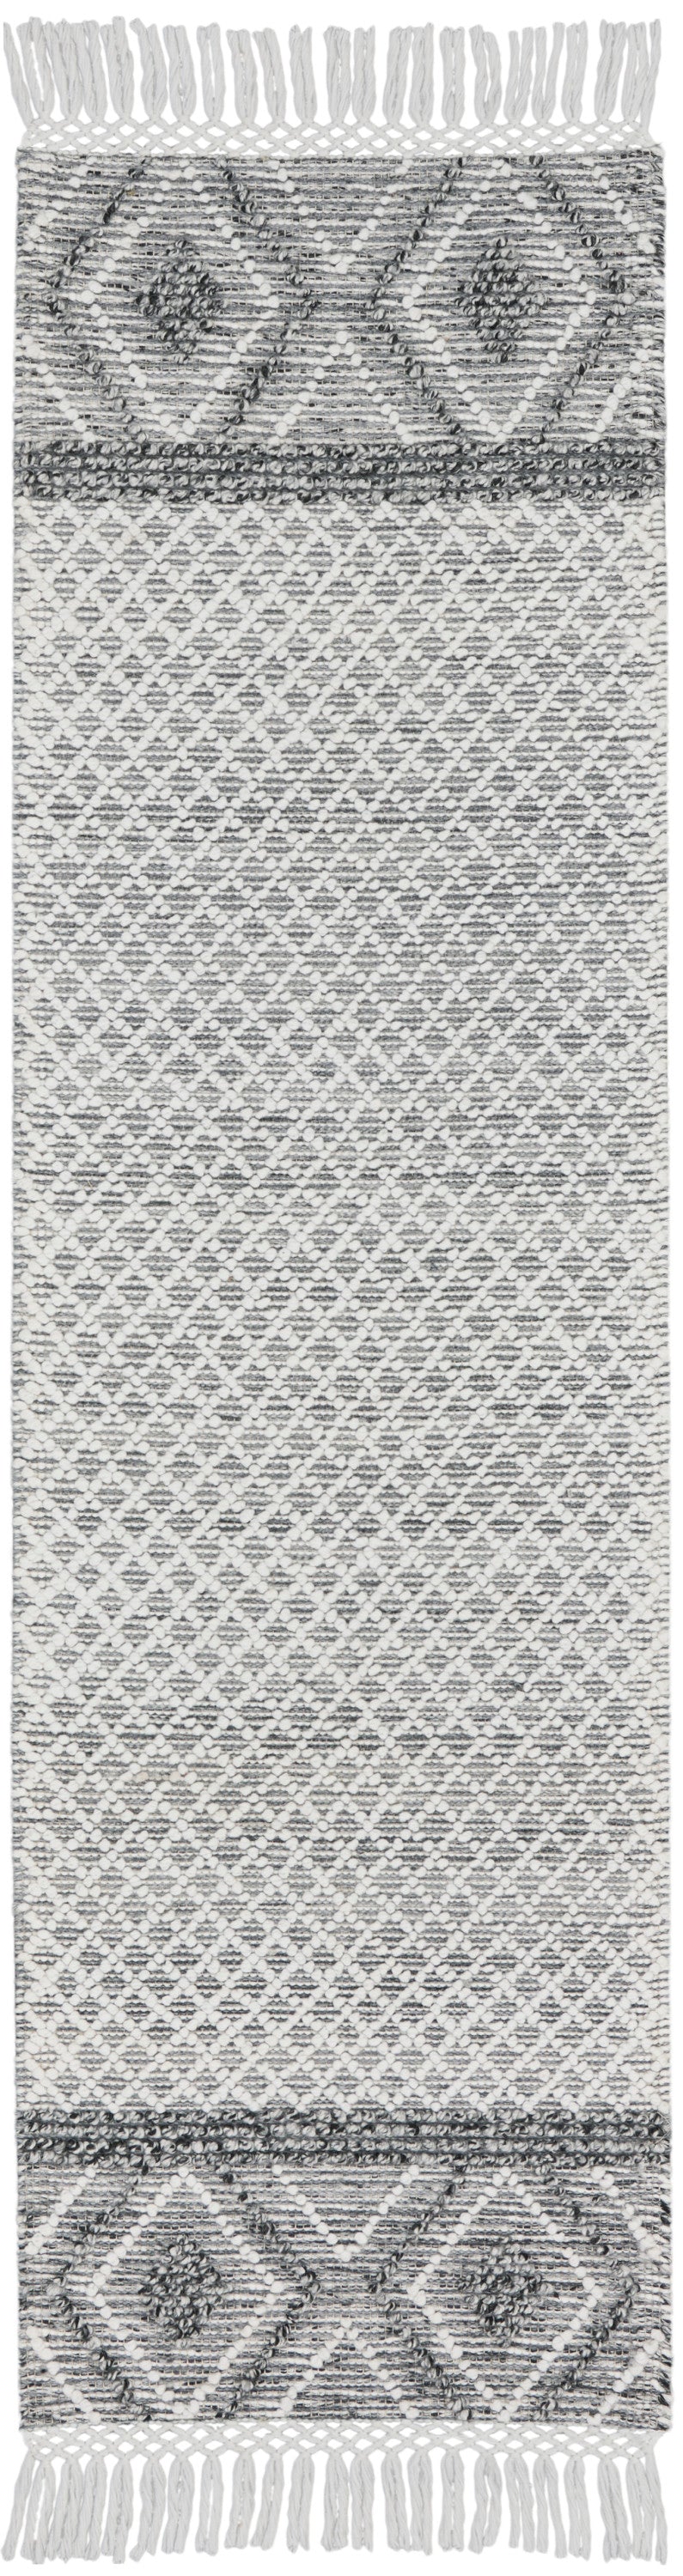 Nicole Curtis Series 3 SR303 Grey Ivory  Contemporary Woven Rug